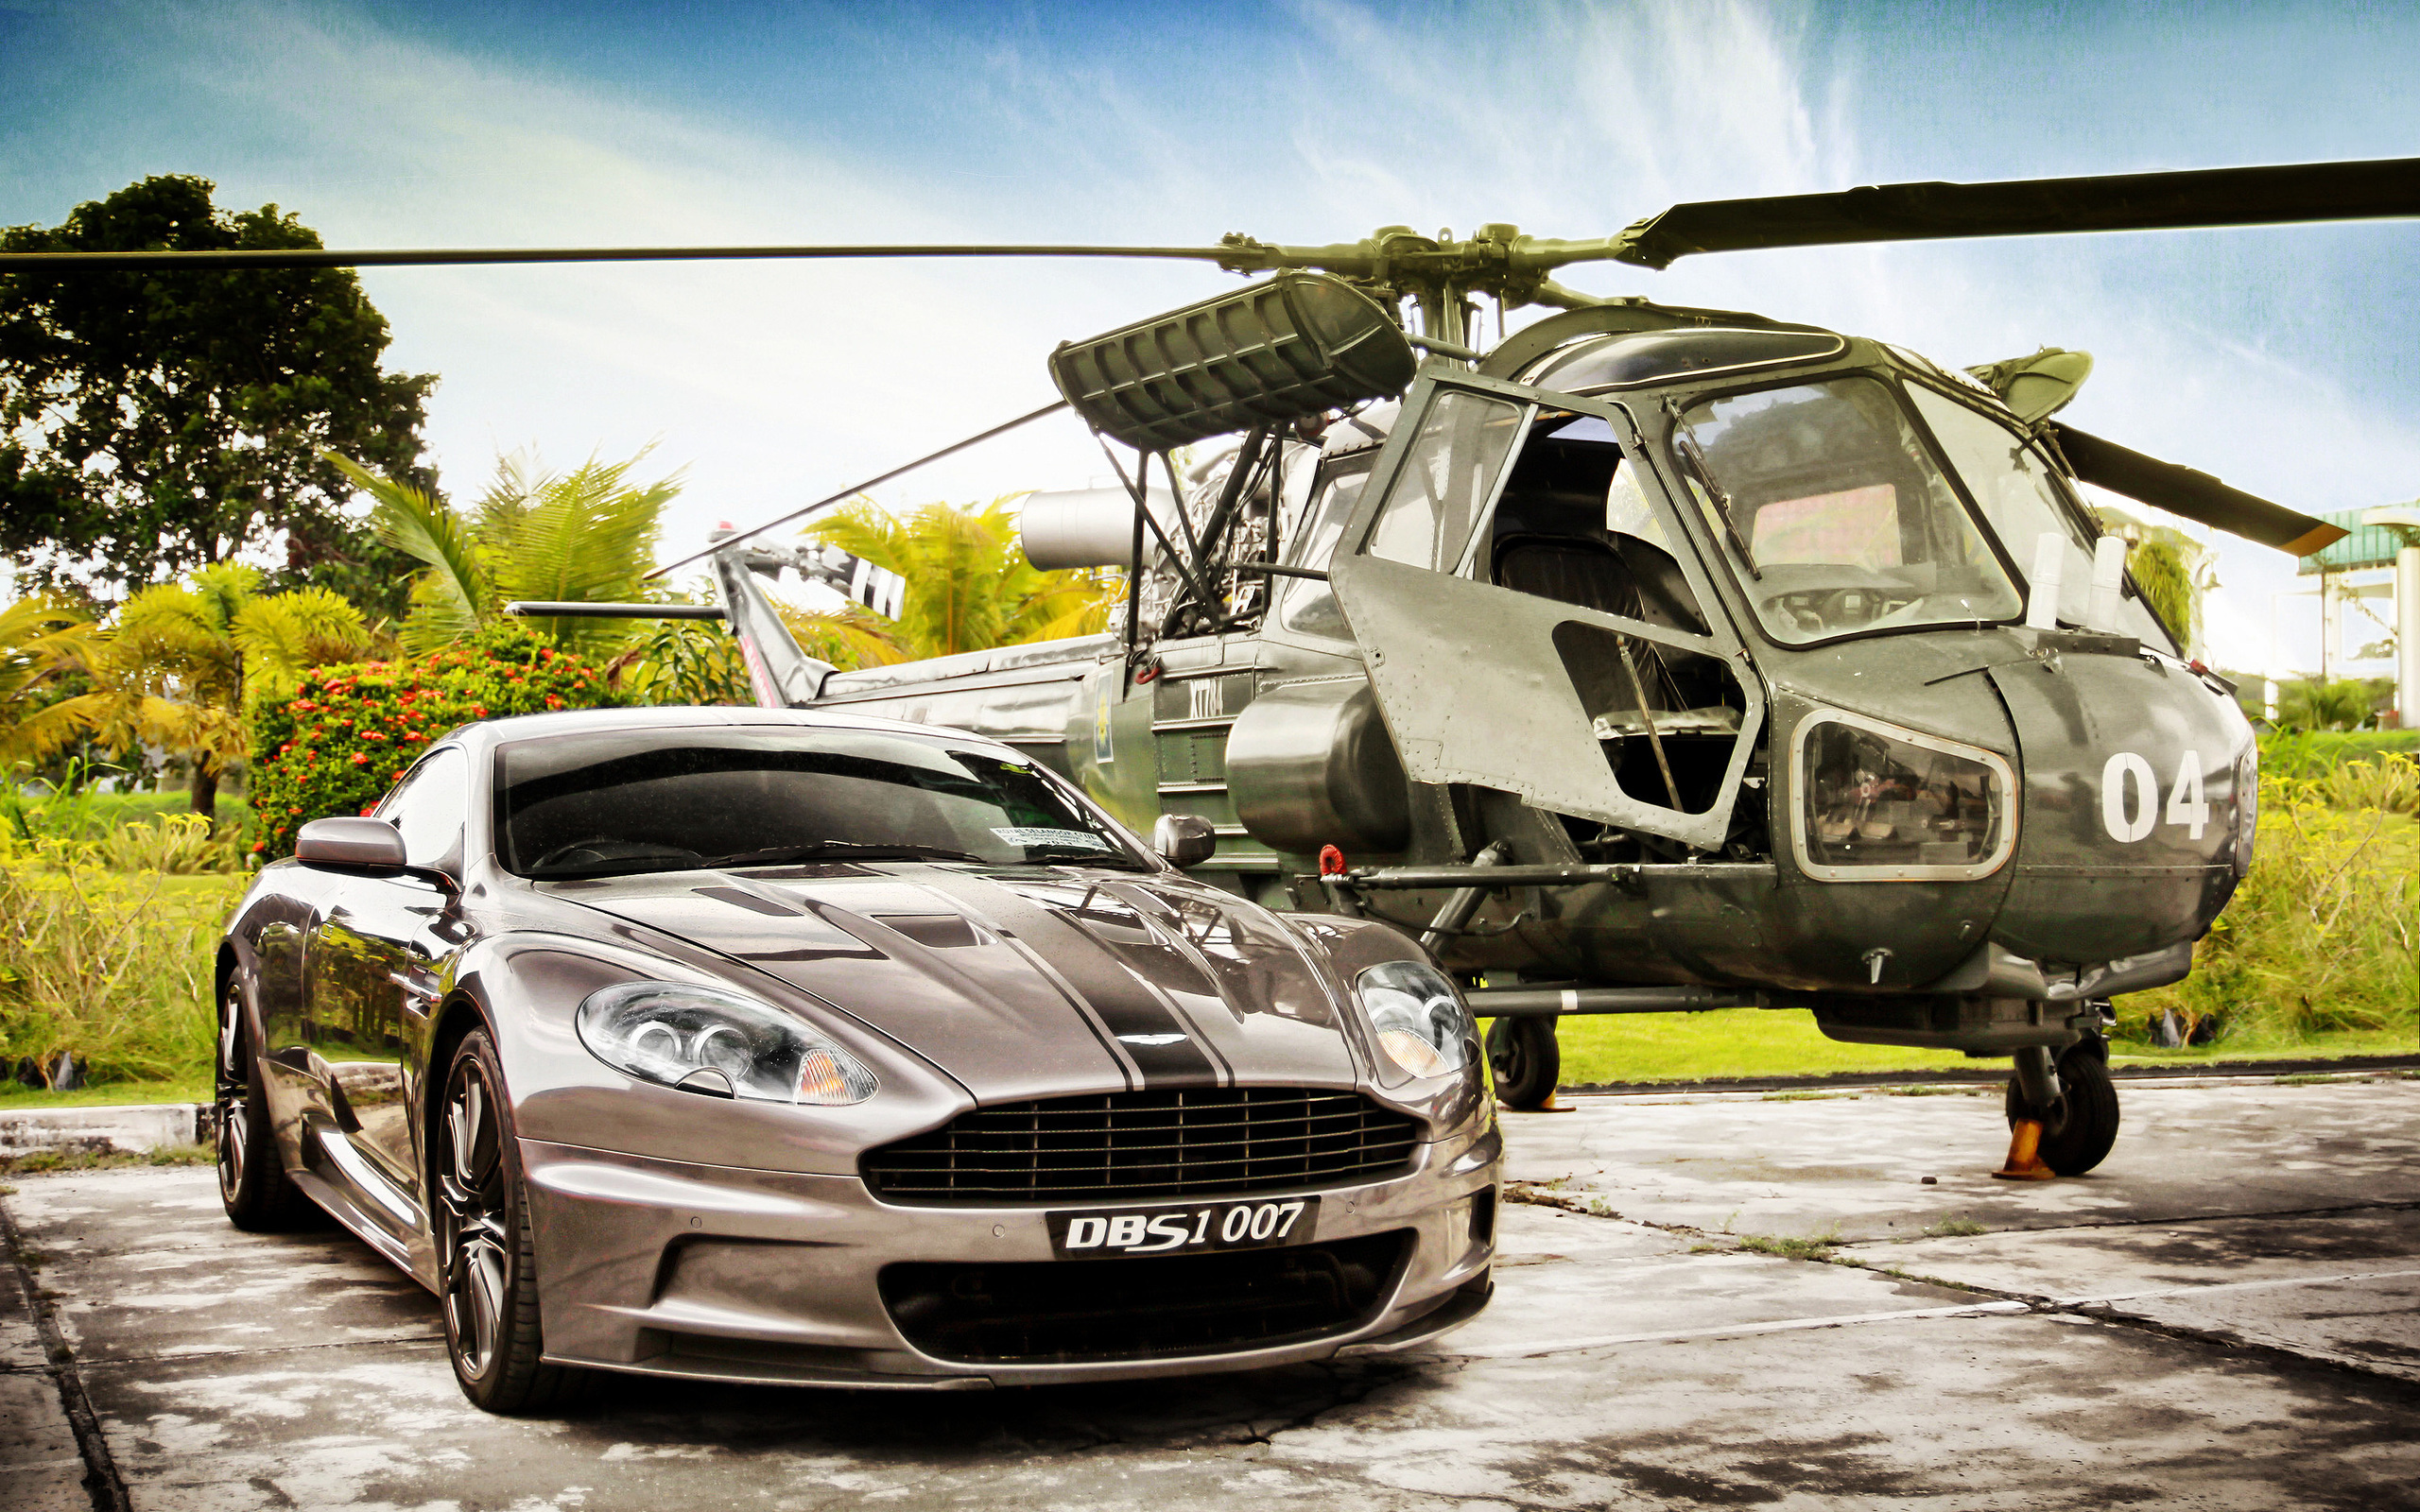 helicopters, transport, auto cell phone wallpapers